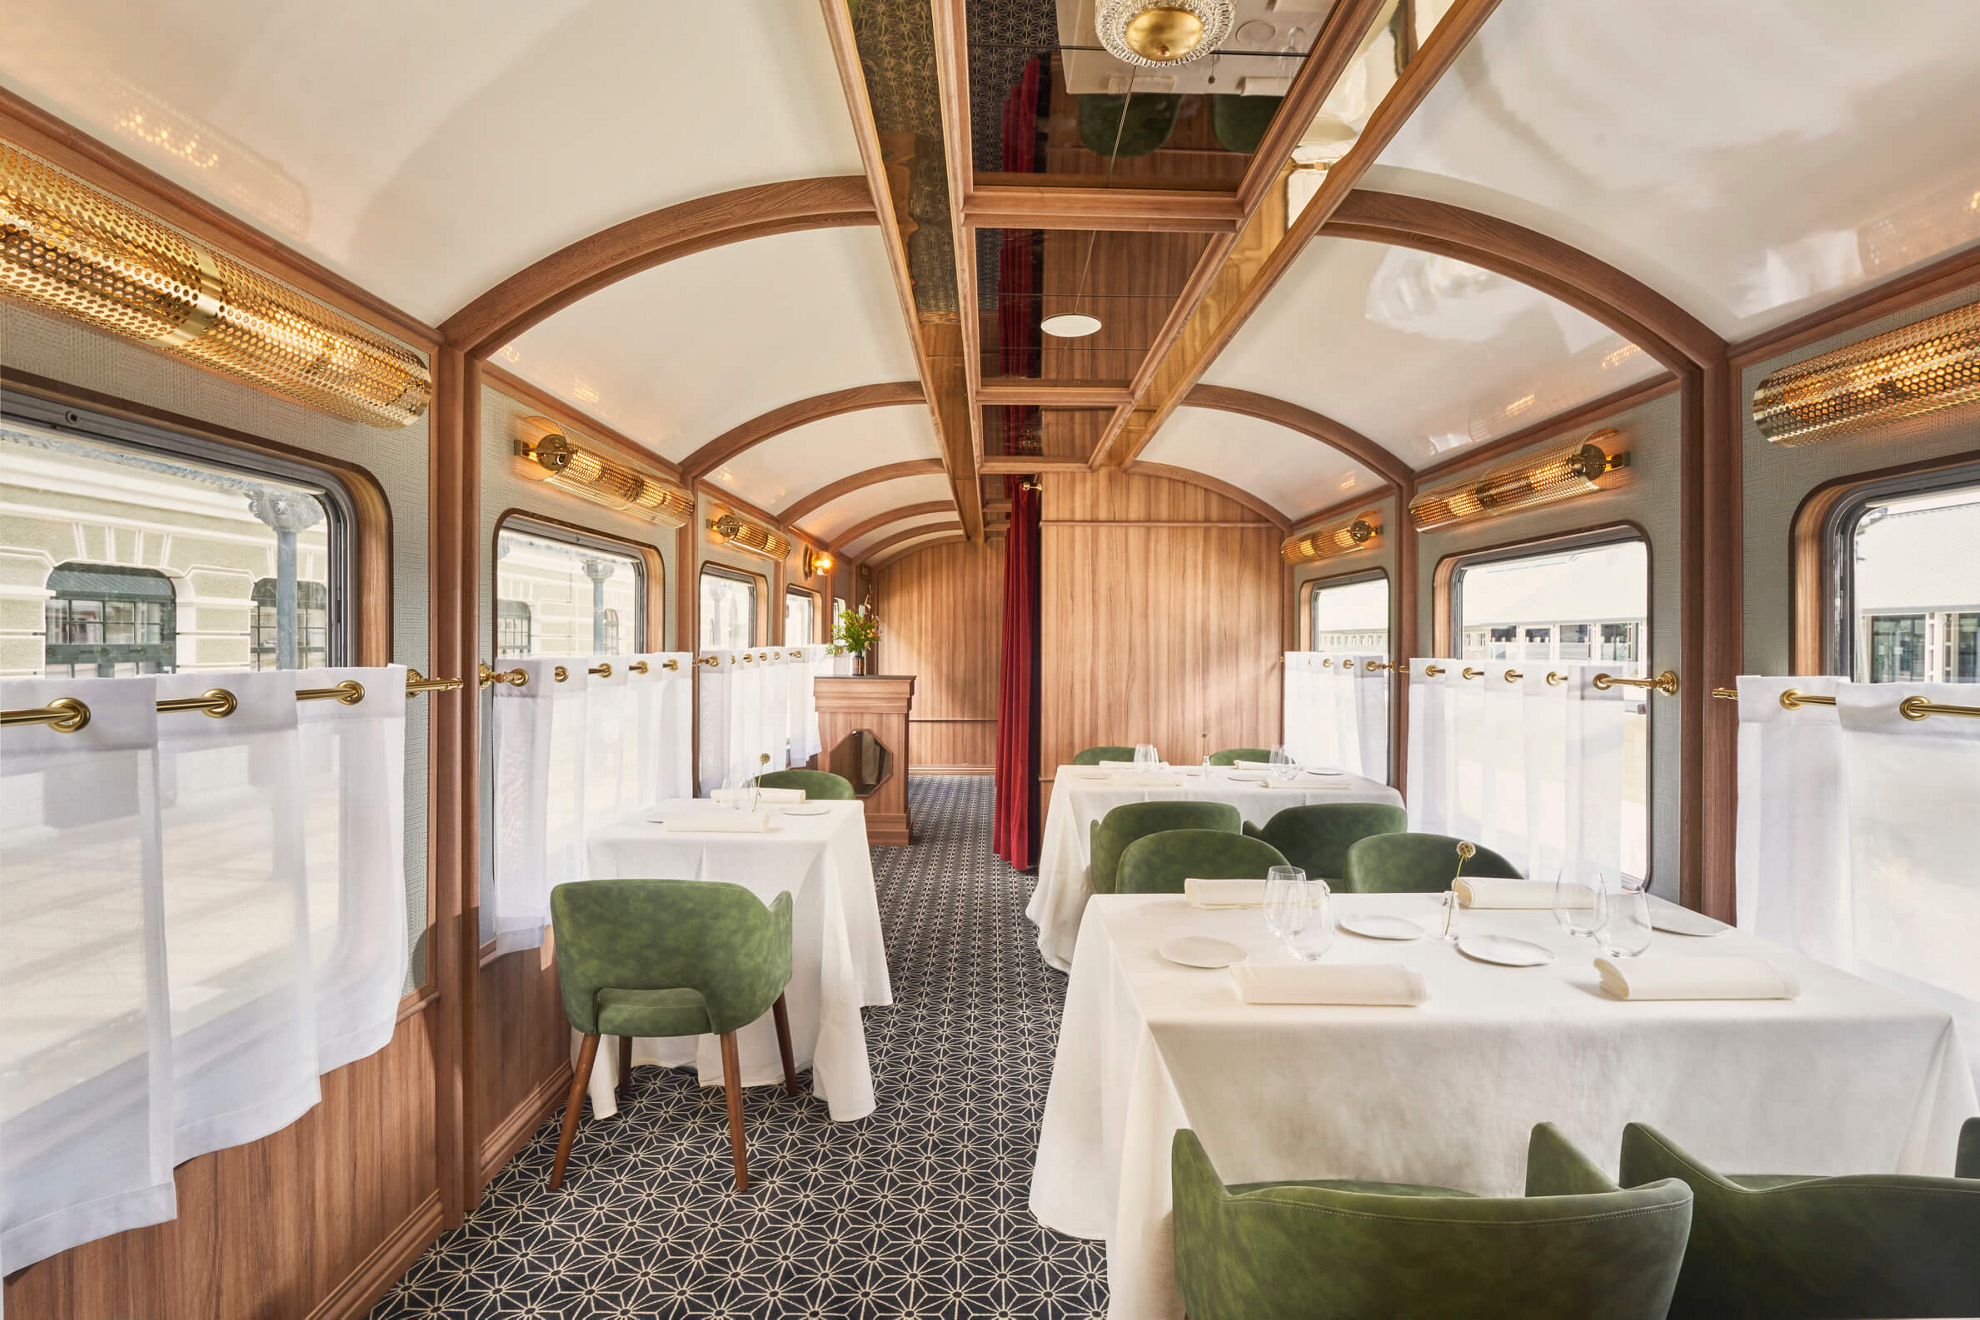 Hotels with Michelin star restaurant: a vintage train carriage restaurant Canfranc Estación